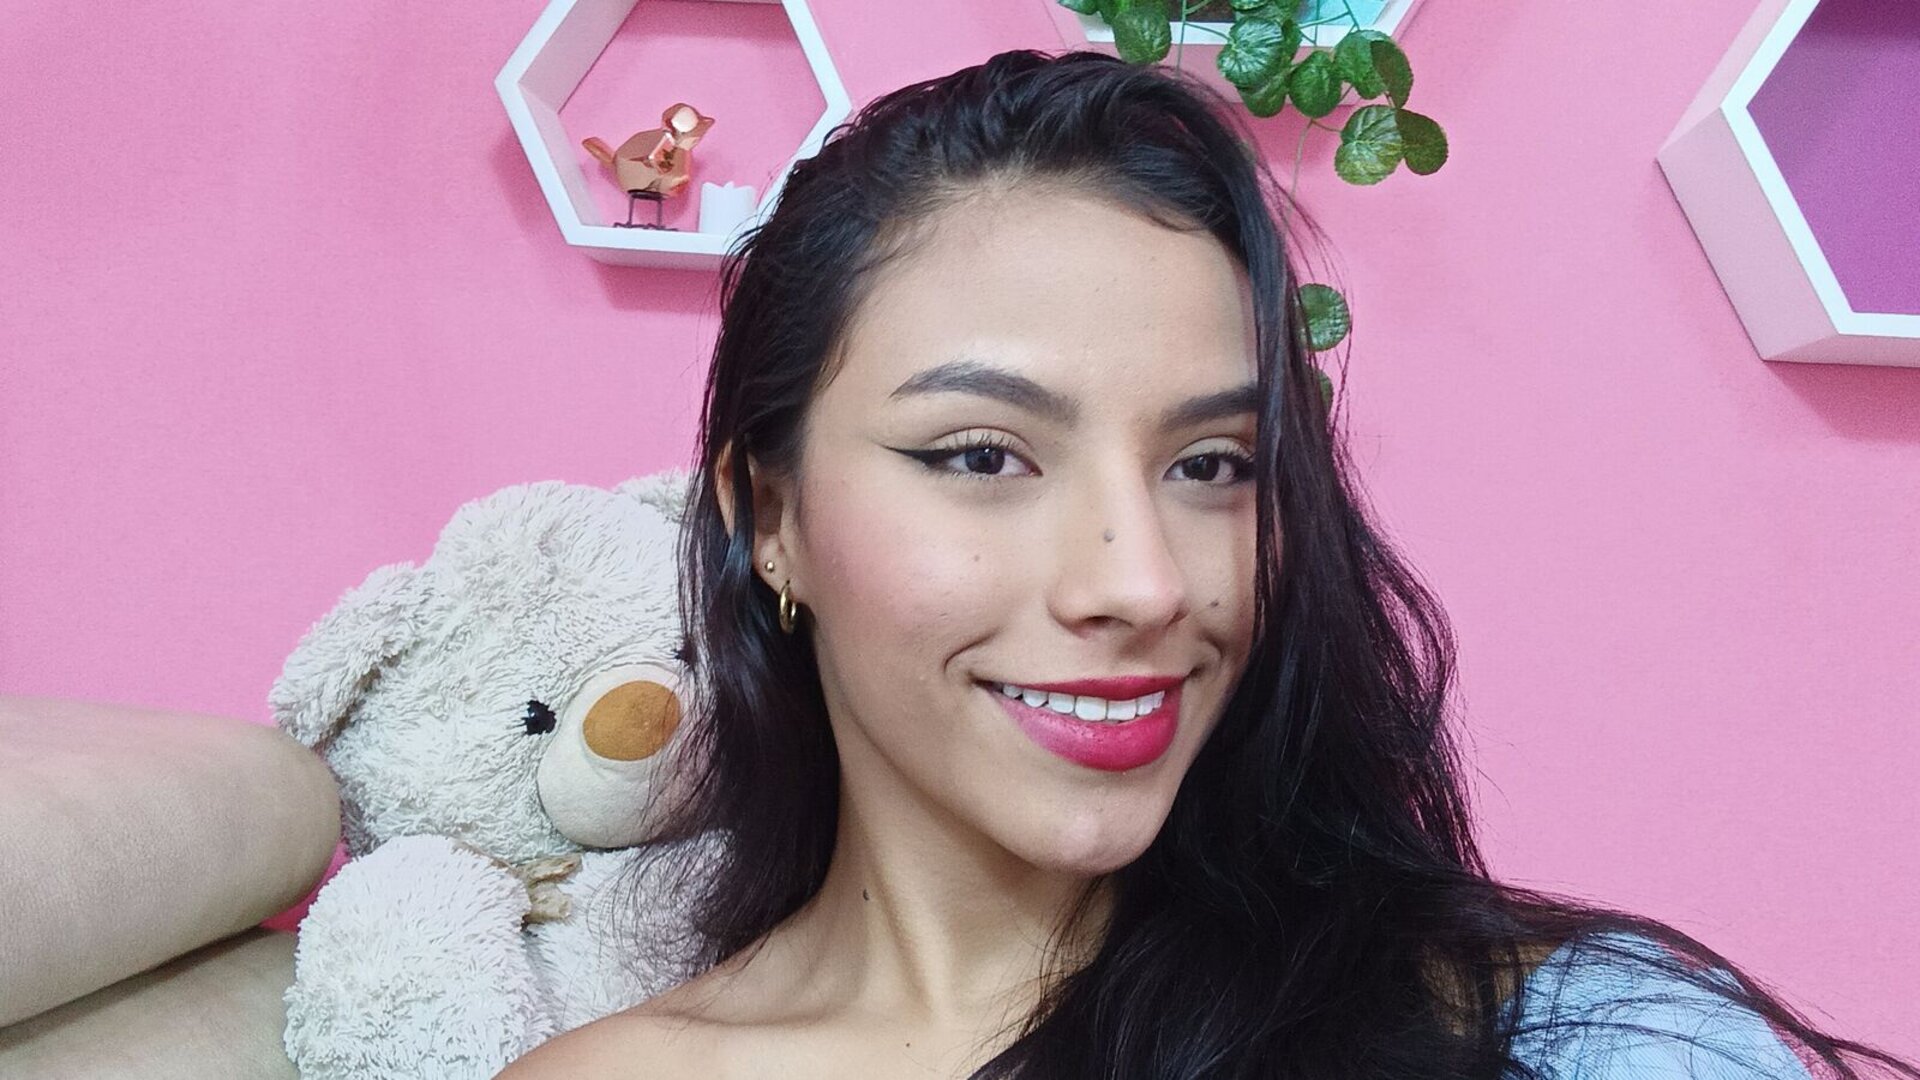 MaluTorres's Live Nude Chat